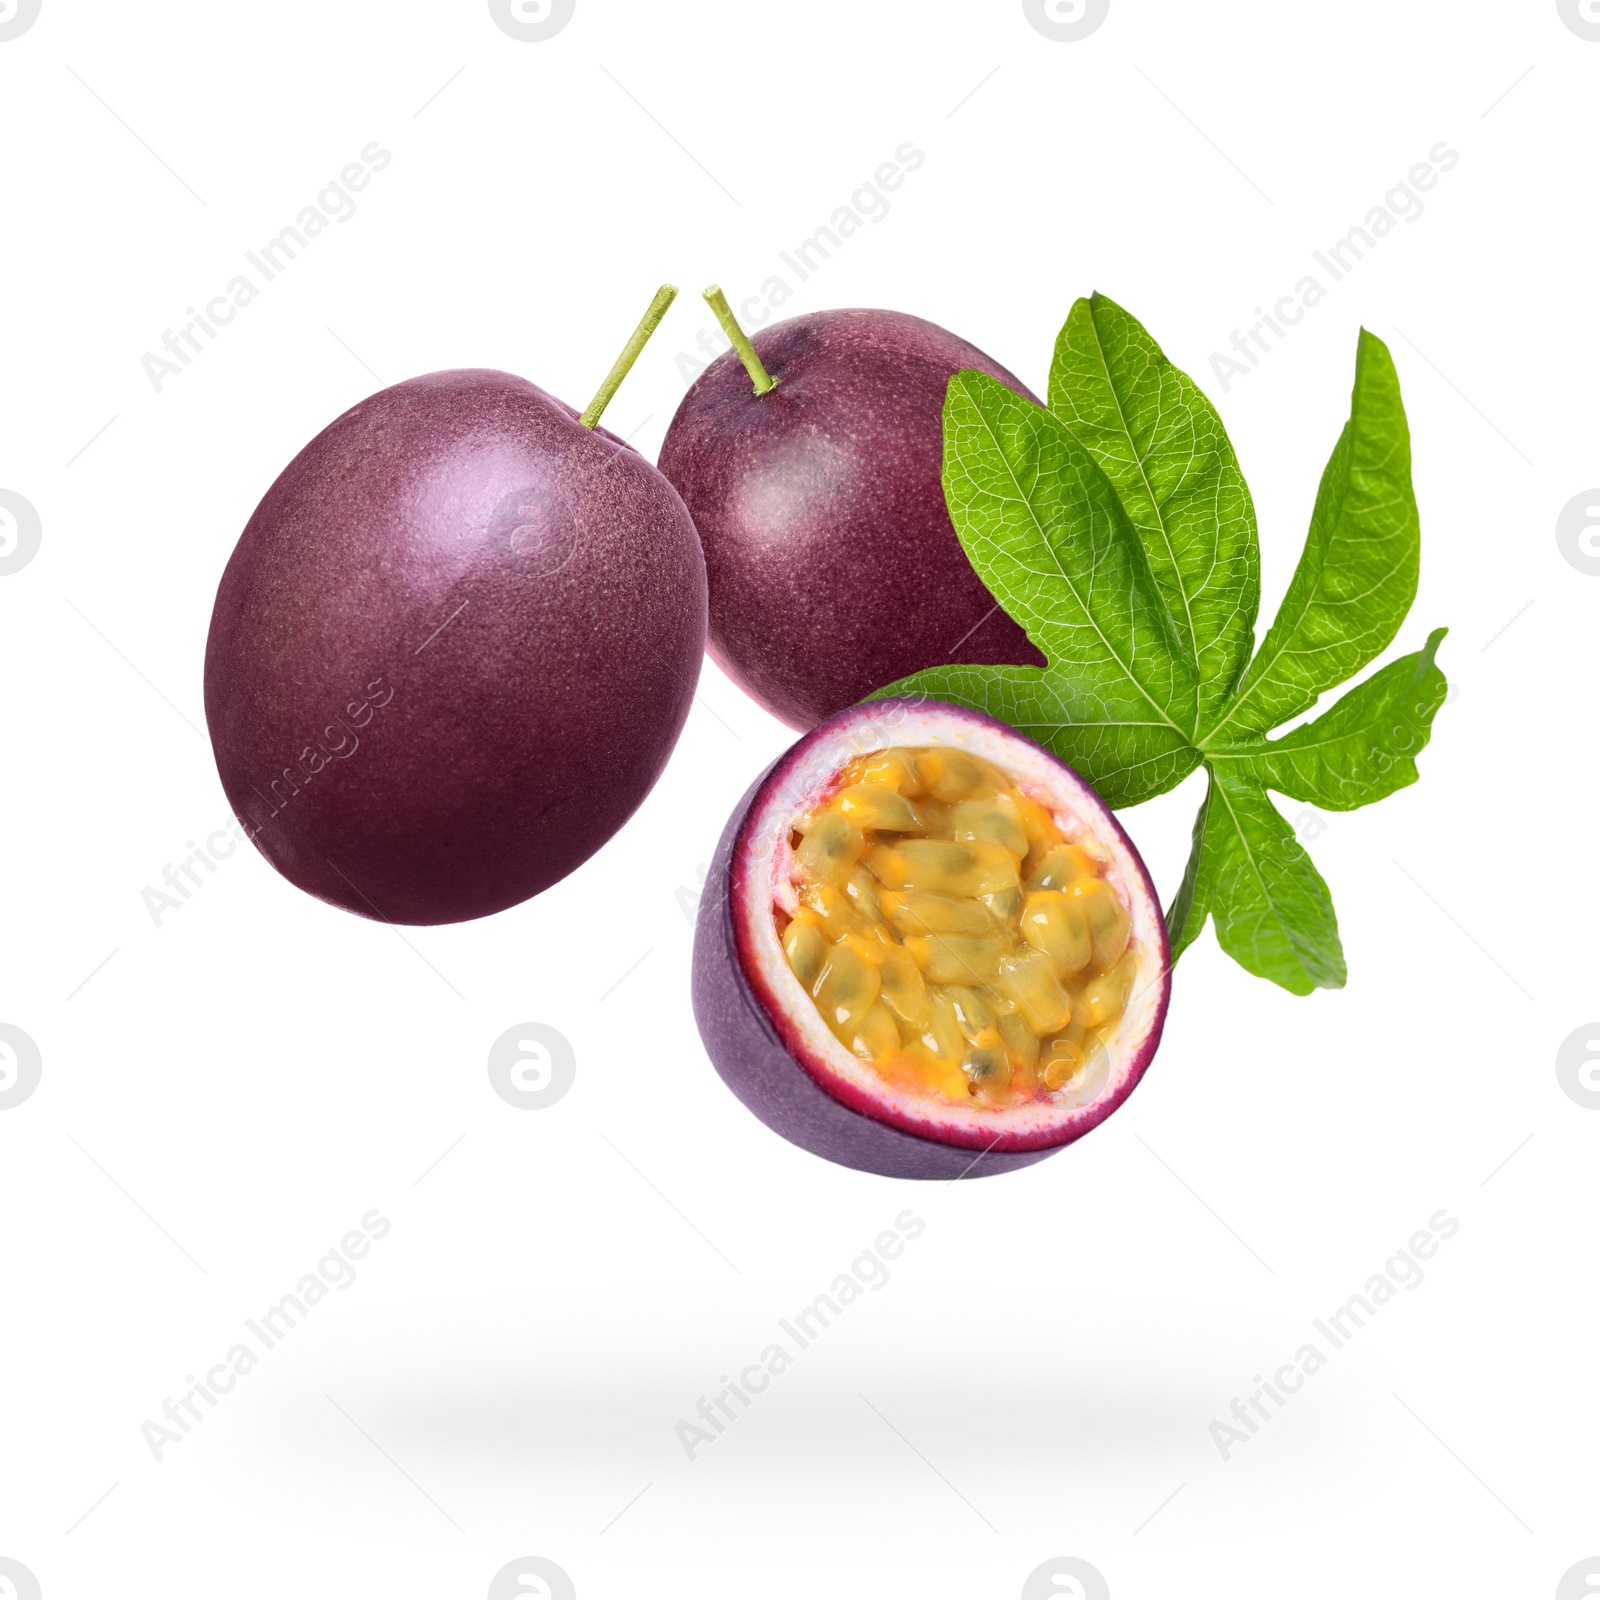 Image of Tasty passion fruits and passiflora leaf falling on white background